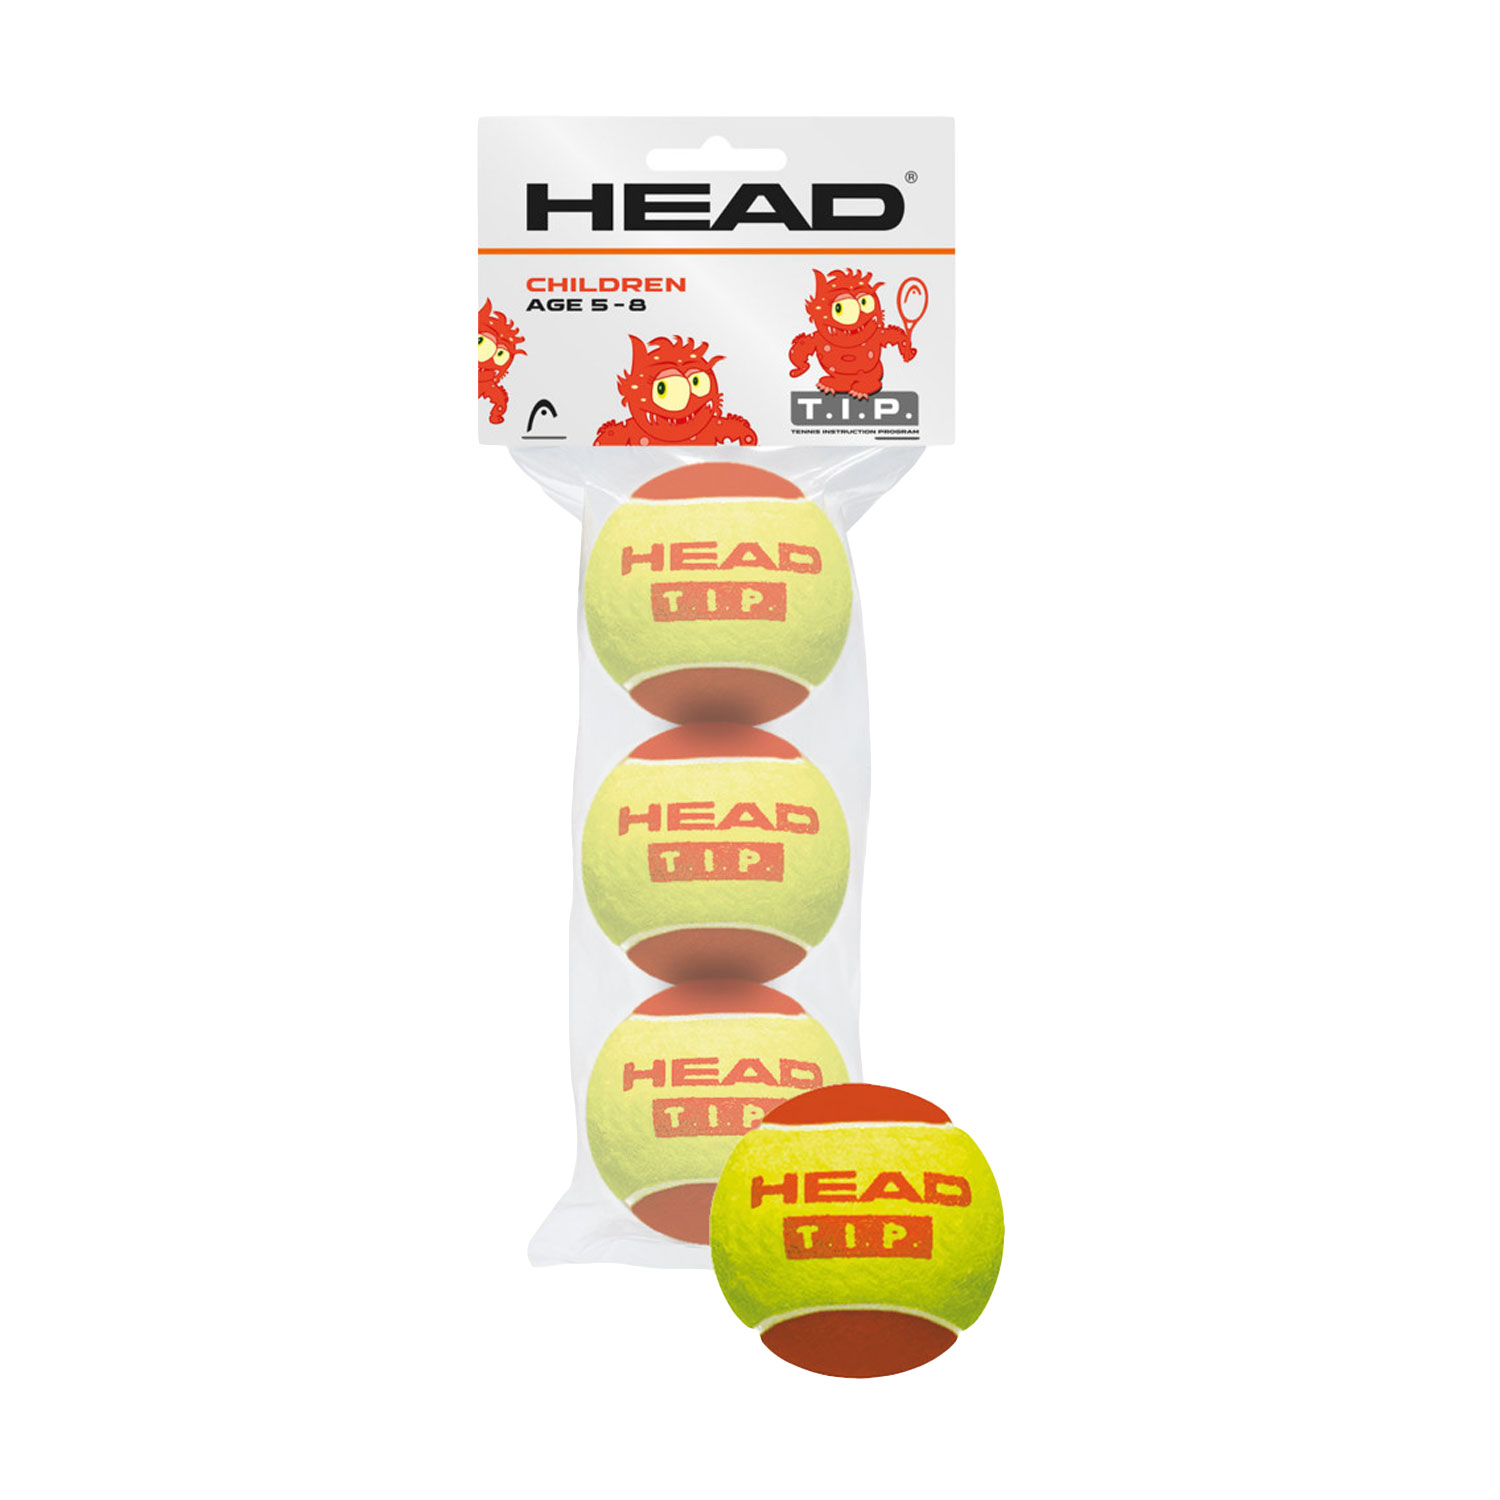 Head T.I.P. Red - Pack of 3 Balls